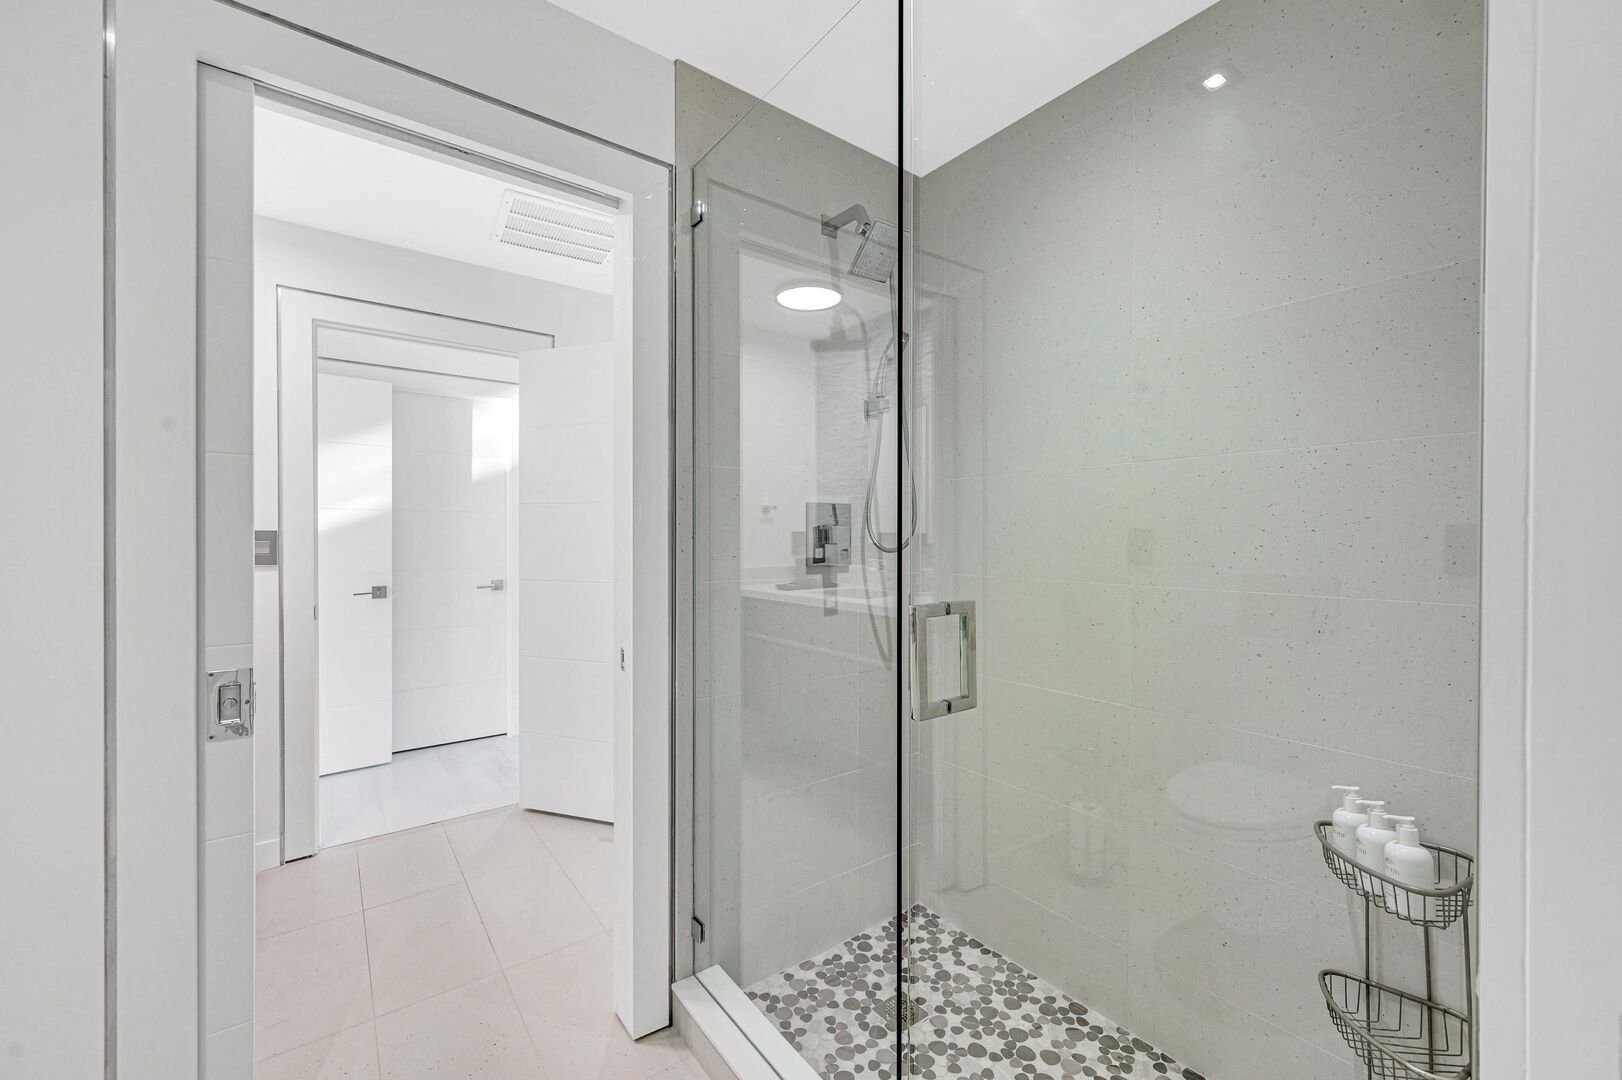 Bedroom two and three share a walk-in shower located between their respective en suite bathrooms.